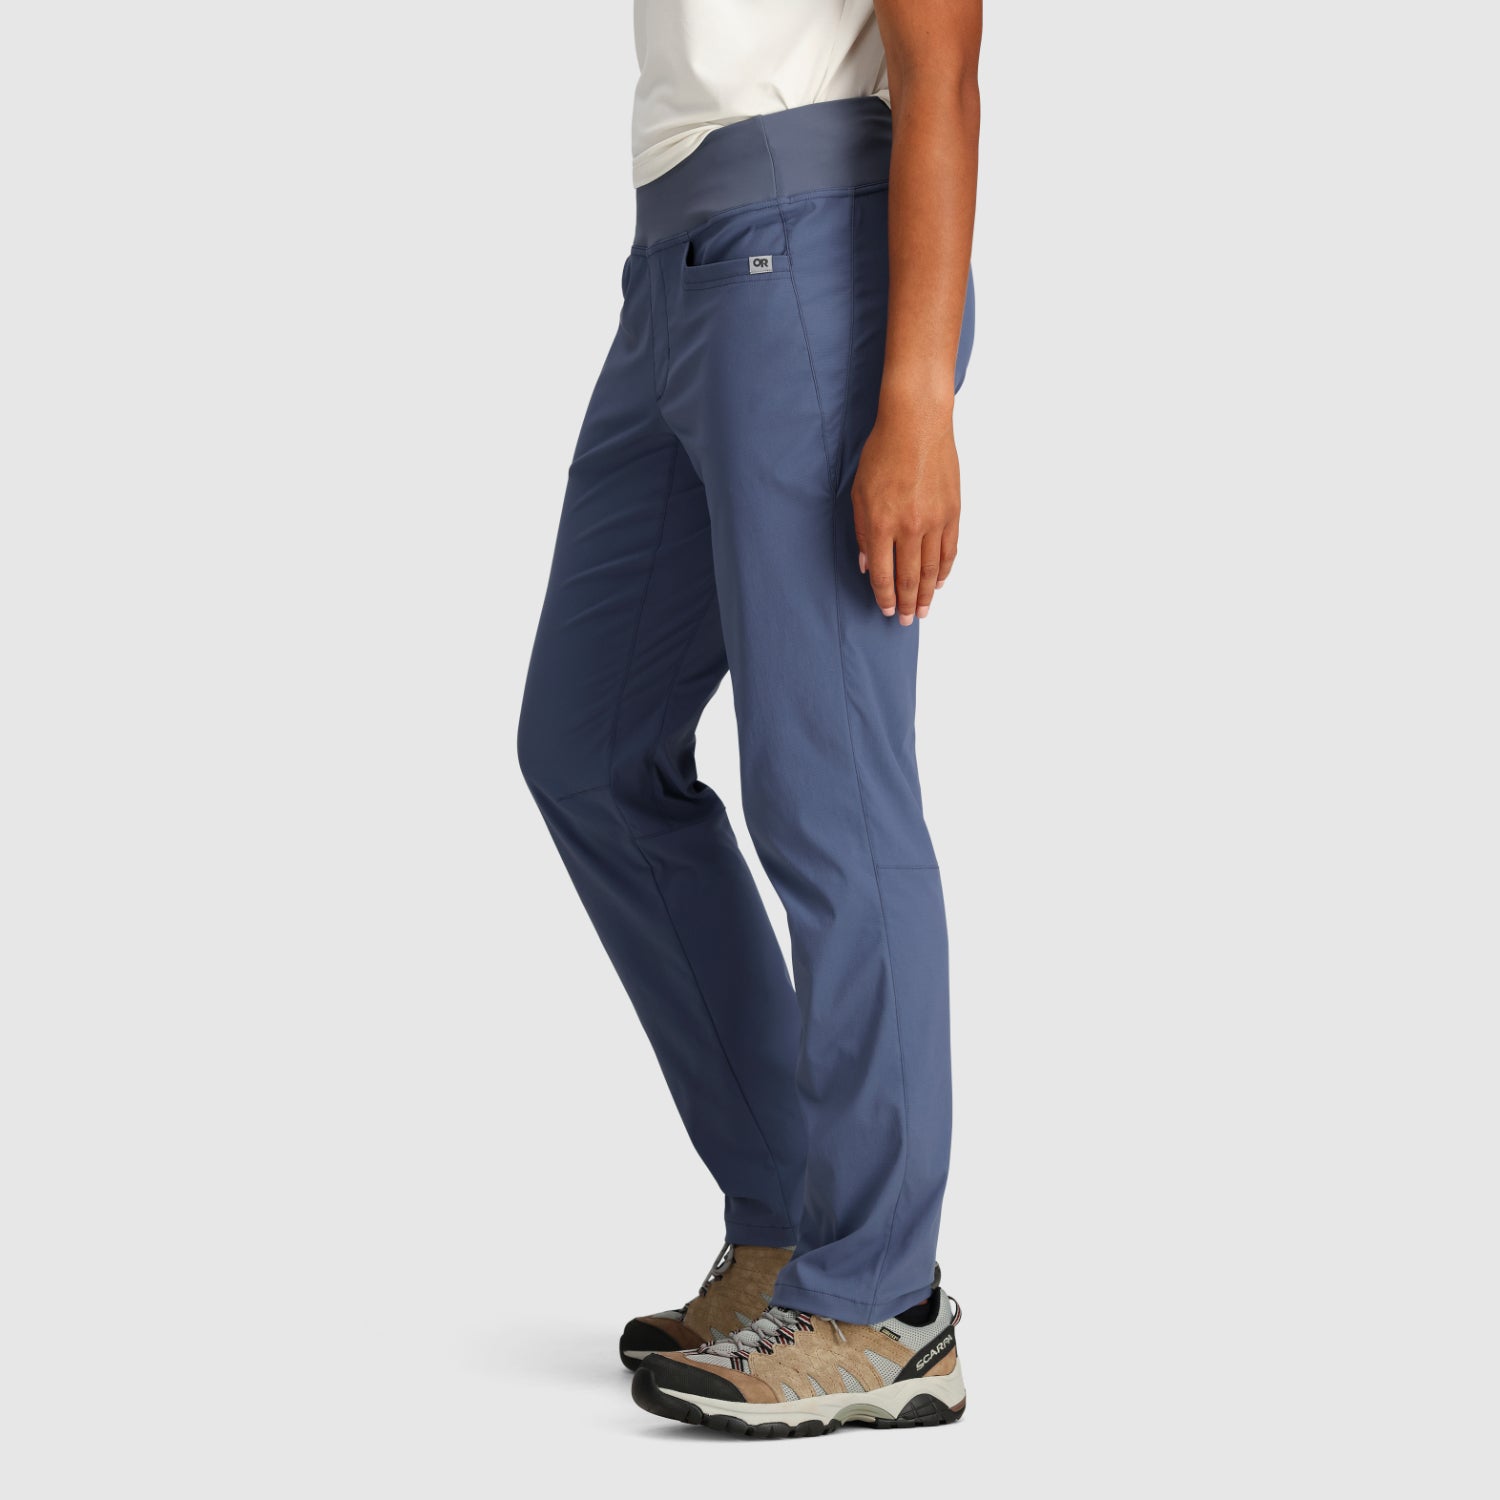 Outdoor Research Zendo Pant Womens in Dawn colour